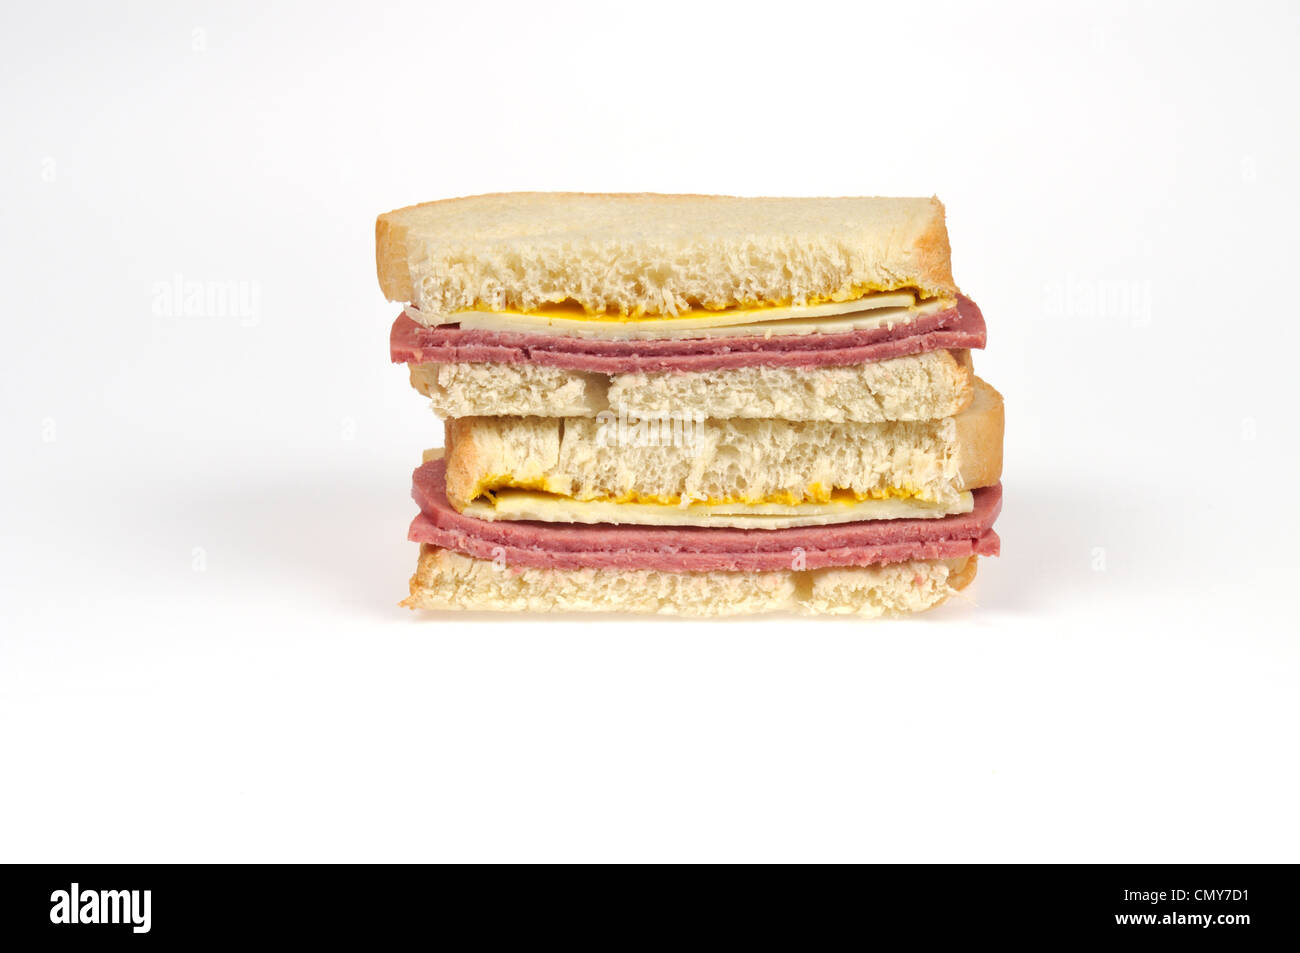 Salami and cheeses sandwich with mustard Stock Photo